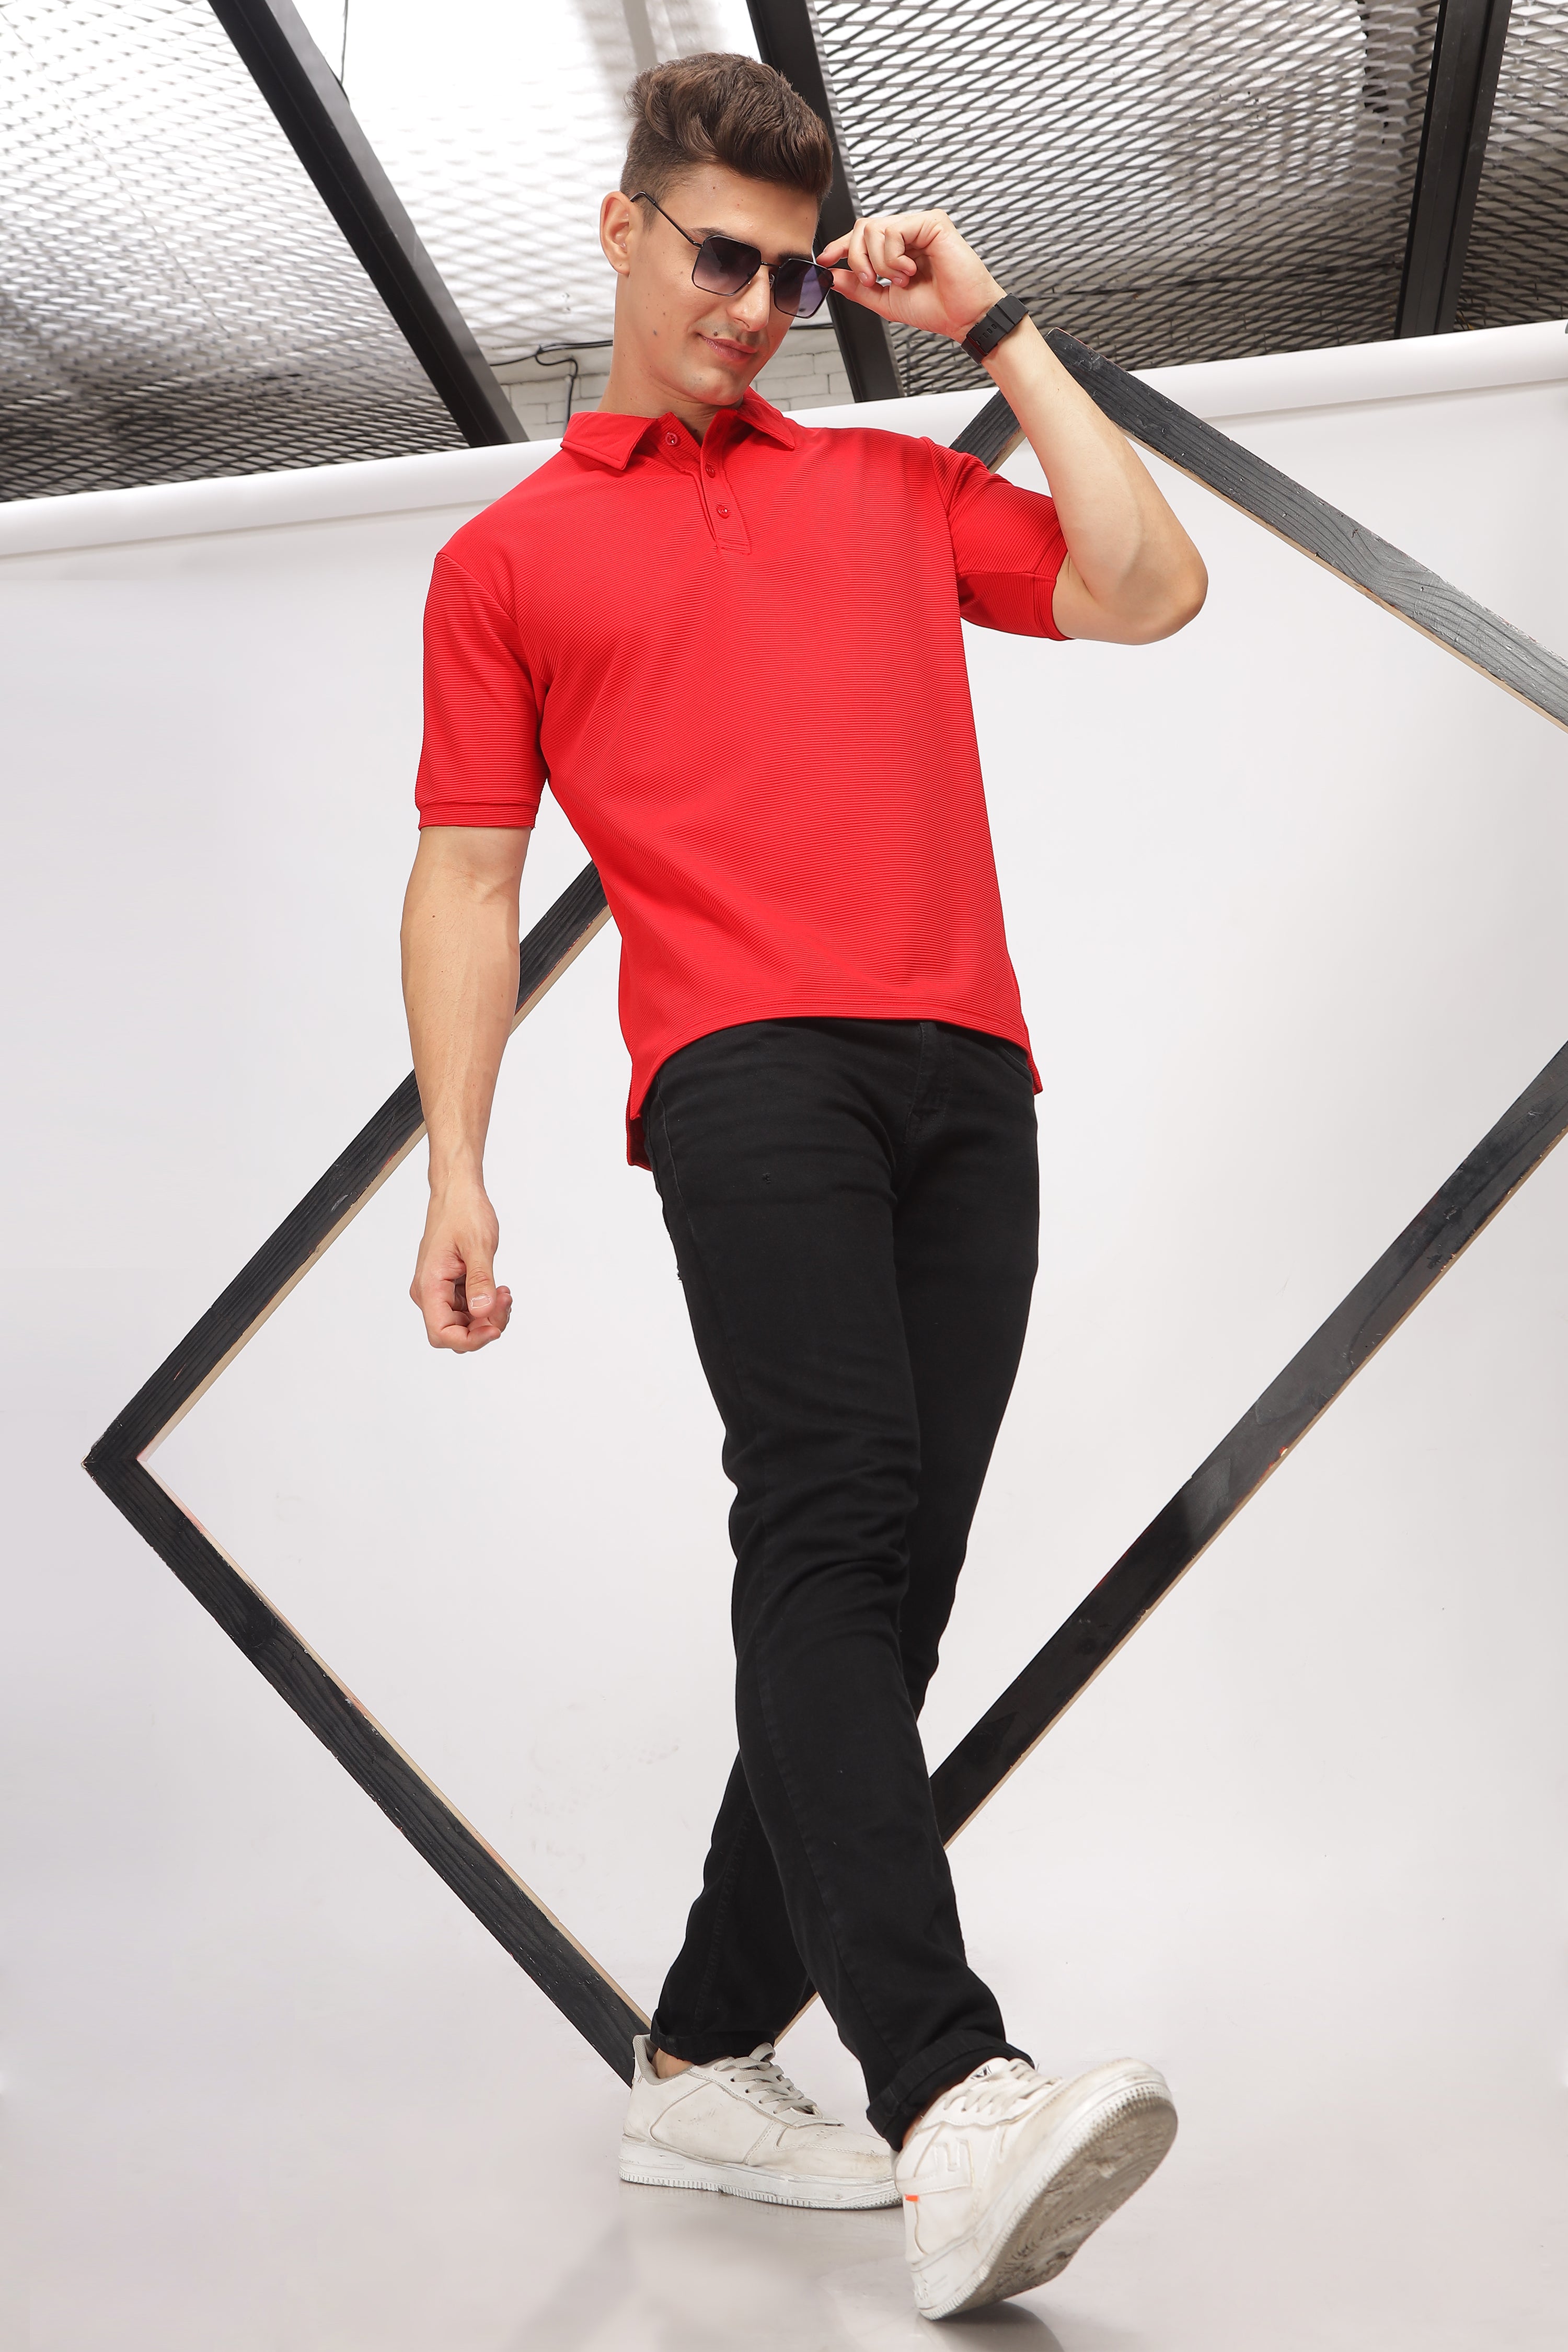 Red Textured Polo T-Shirt